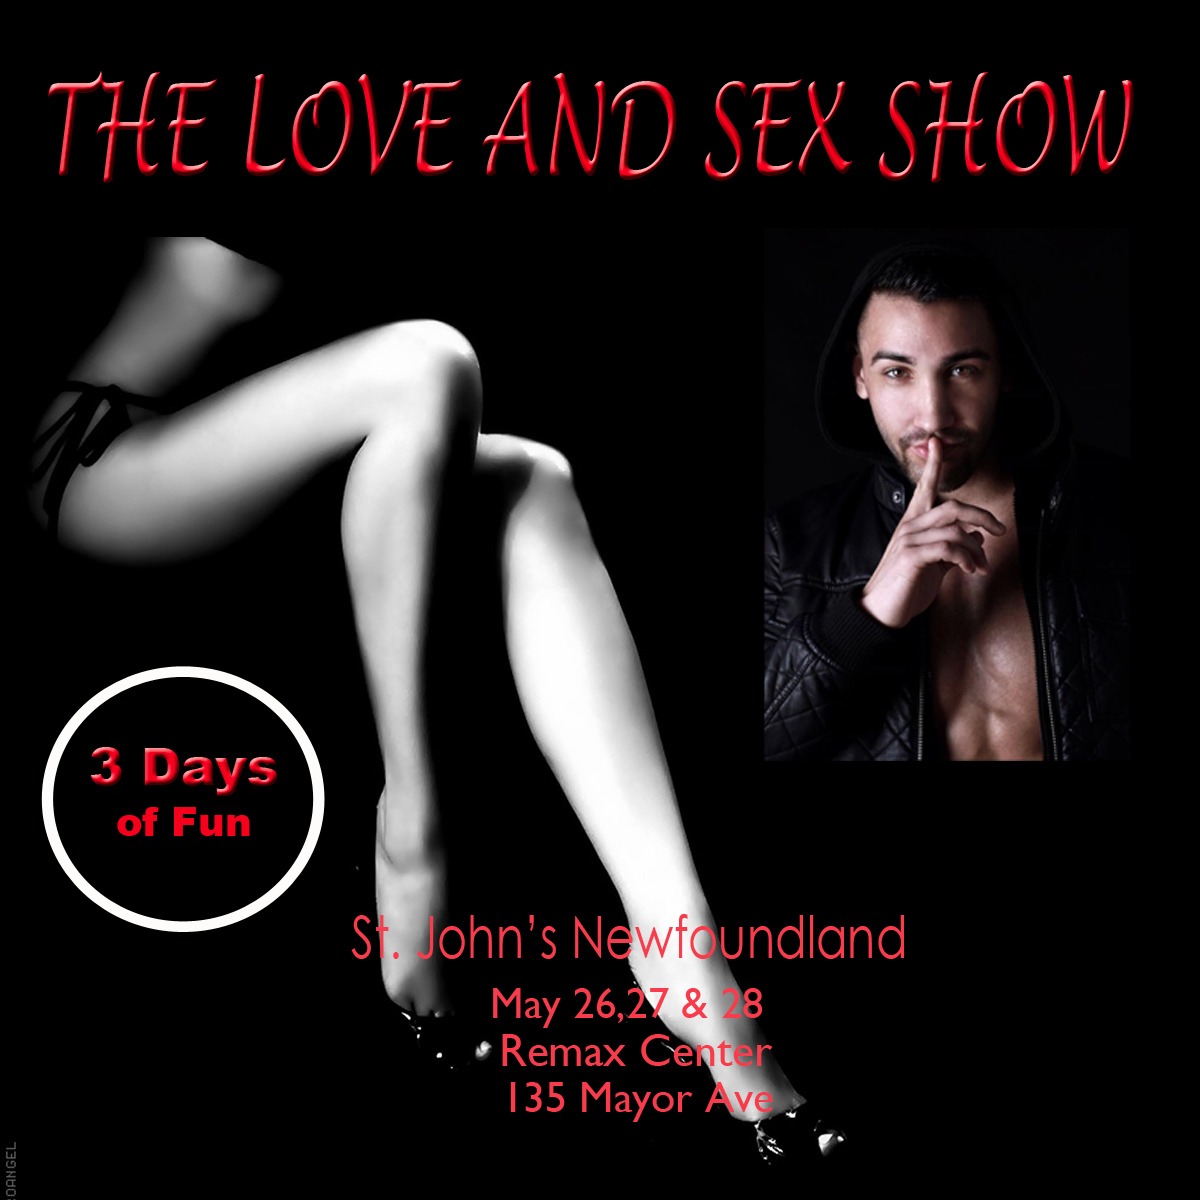 The Love And Sex Show 2017